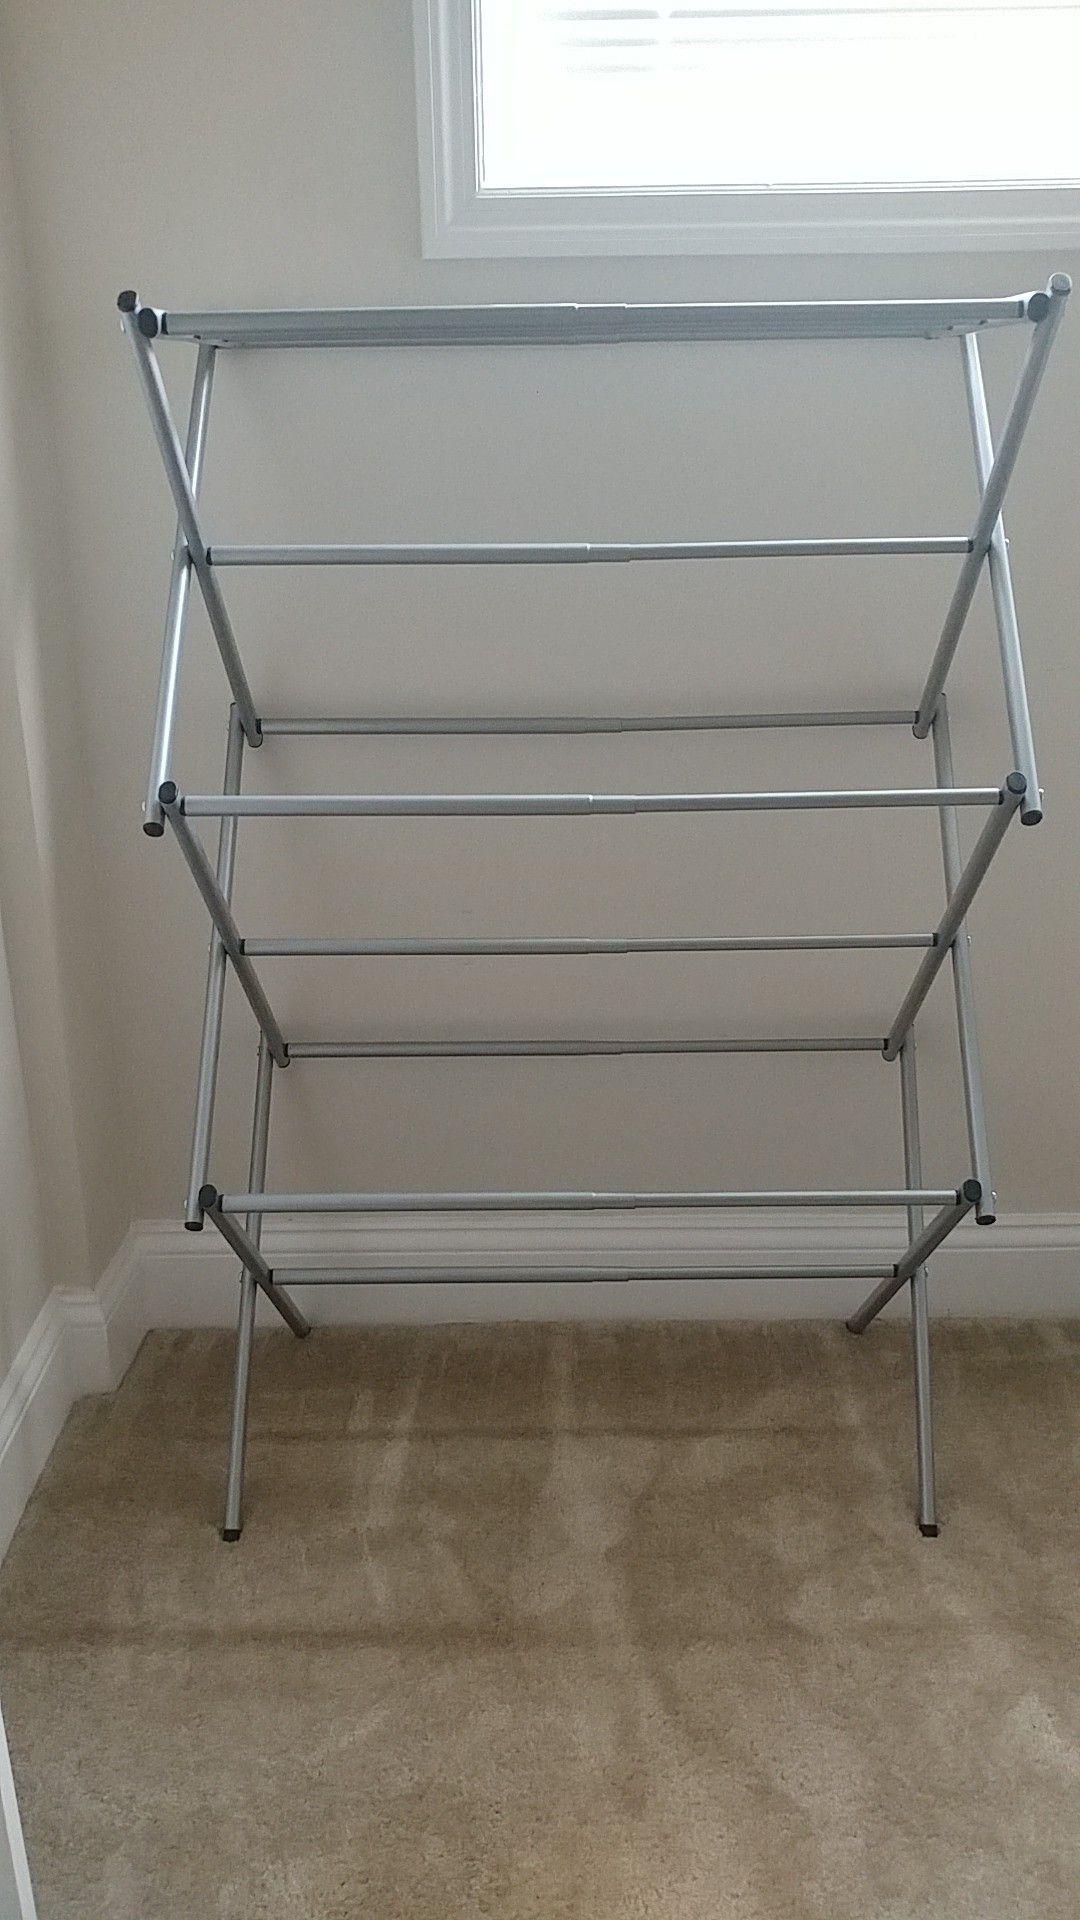 Adjustable clothes drying rack